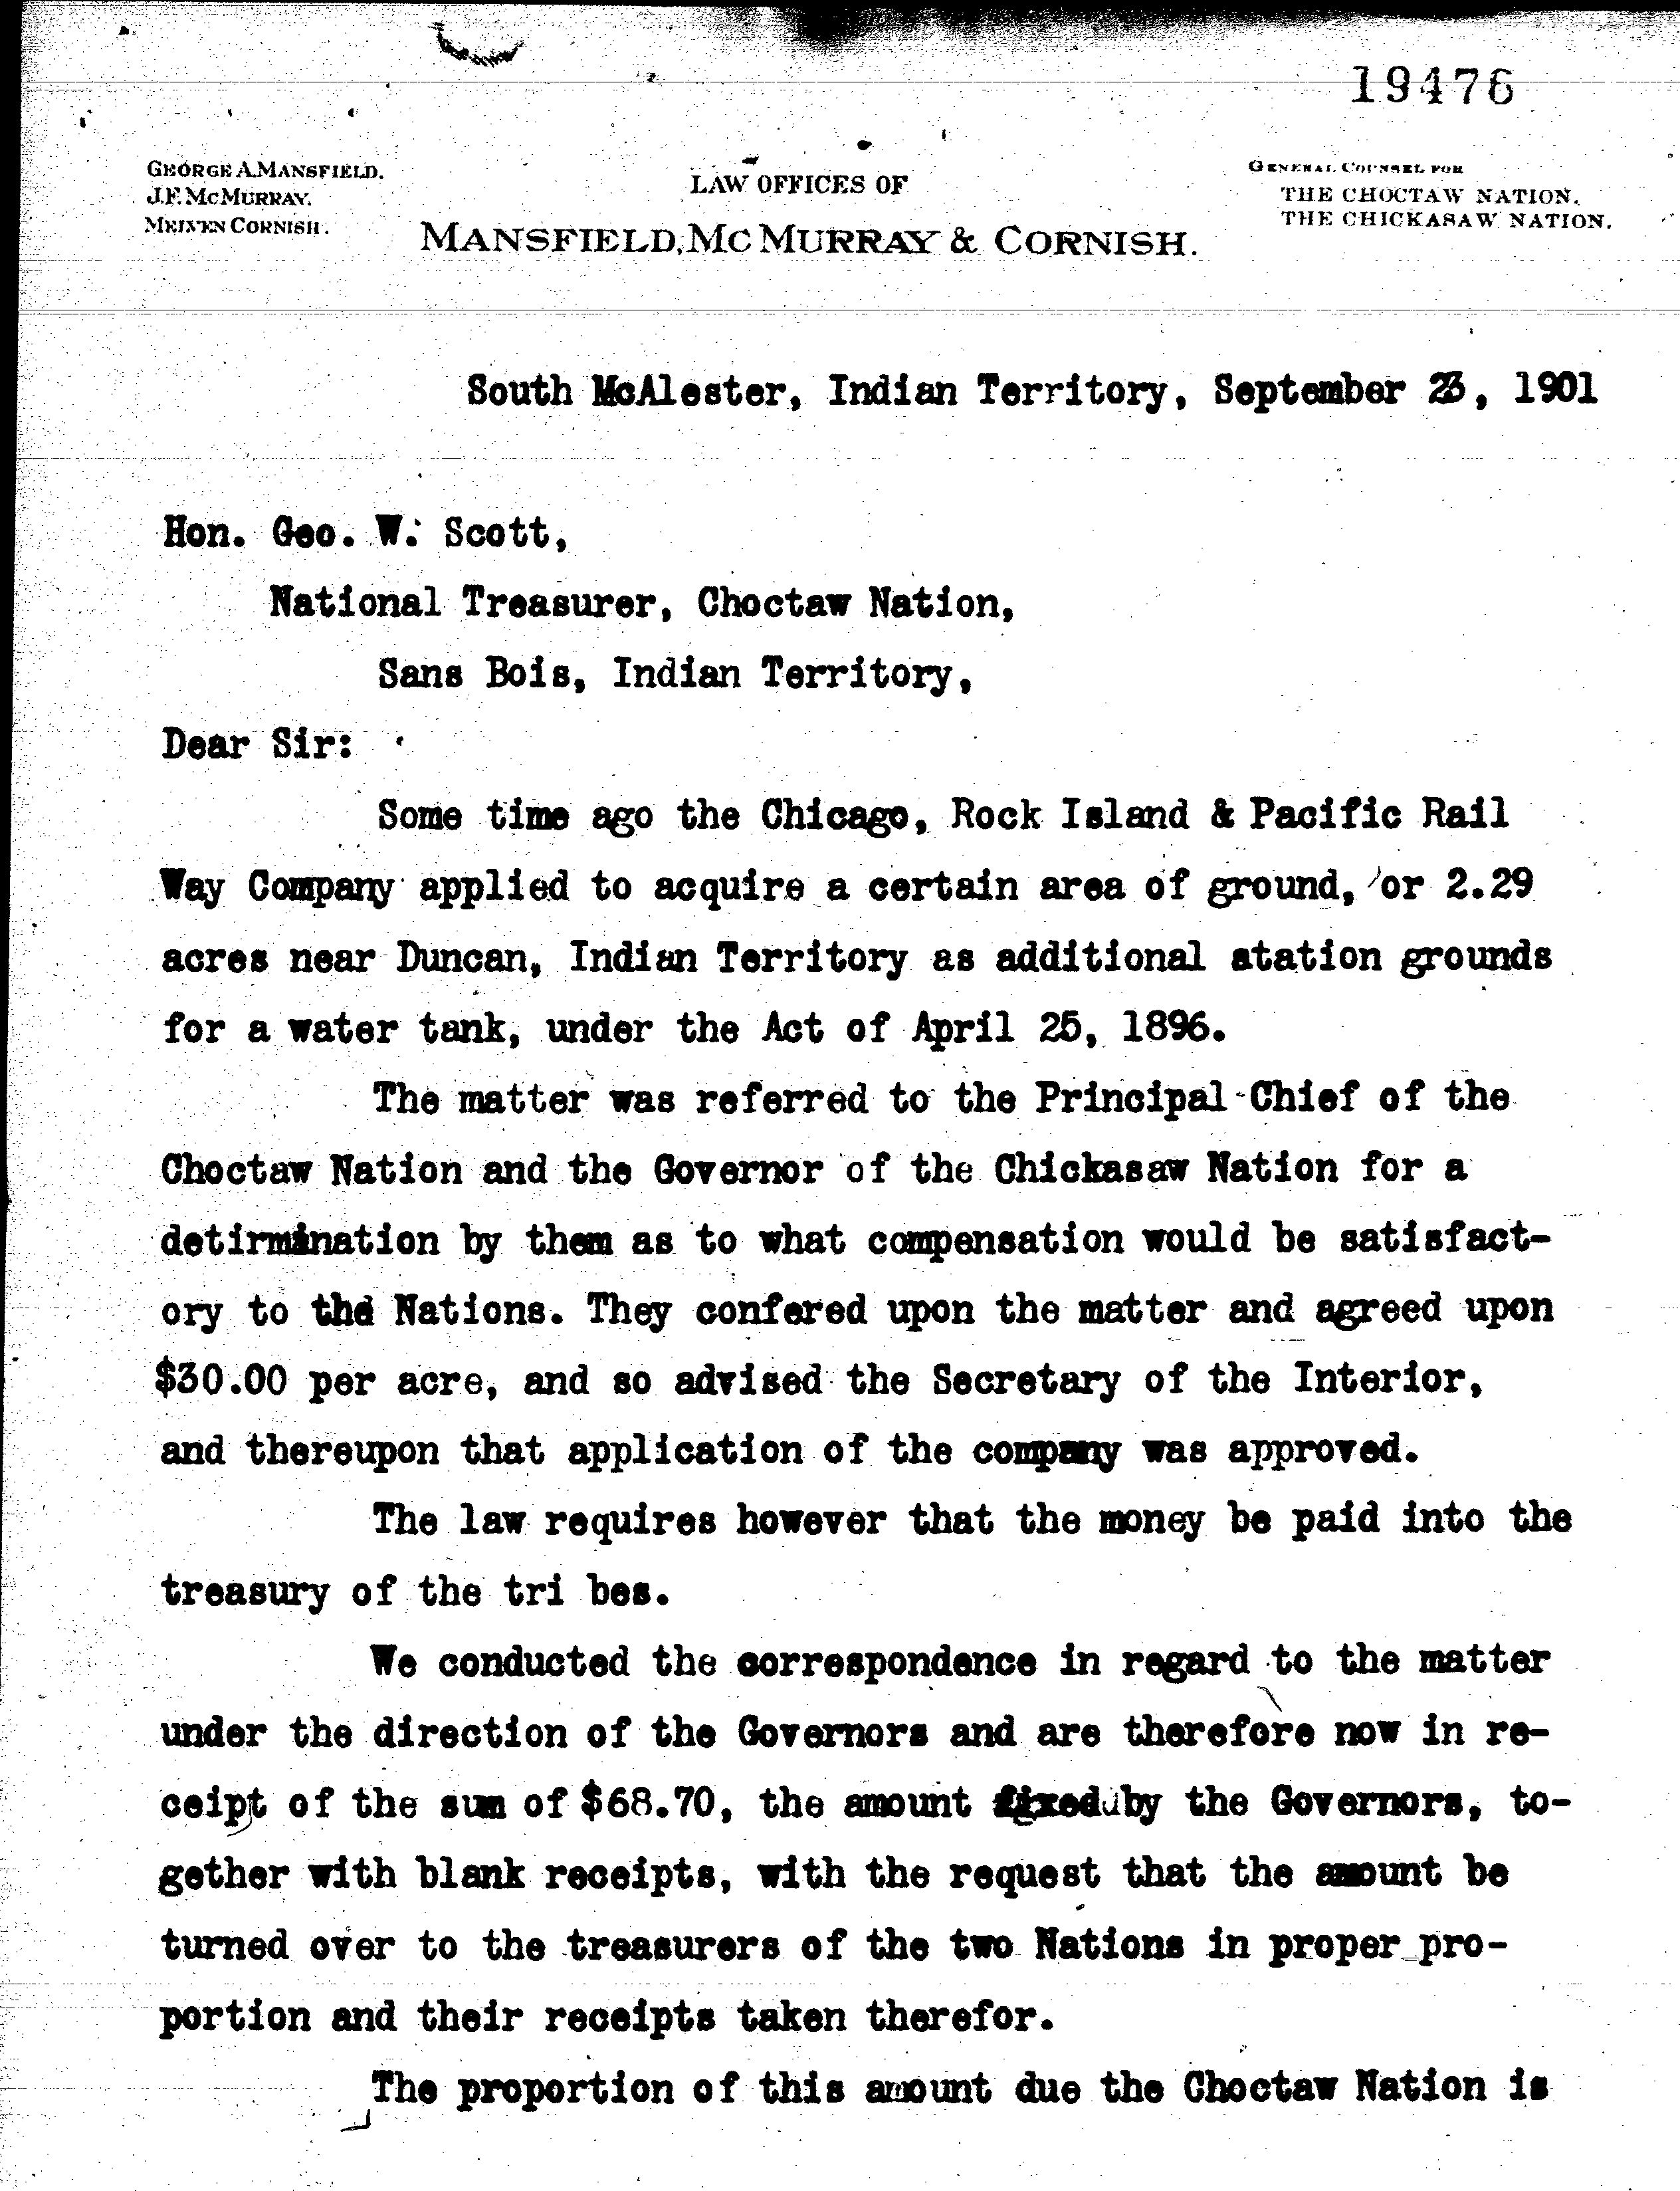 Letter from Chicago Rock Island and Pacific